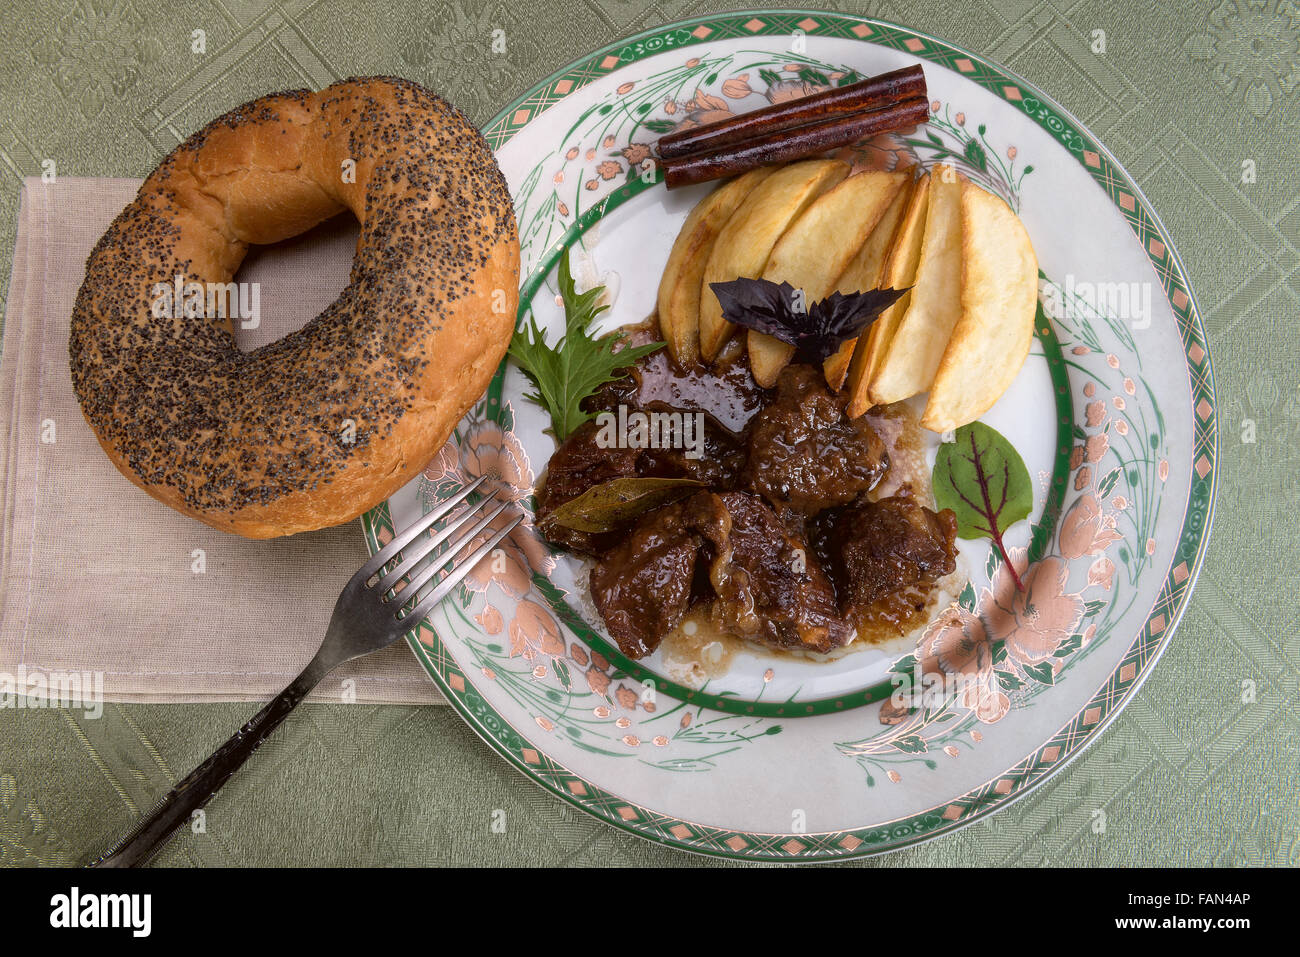 Esik fleisch - A traditional Ashkenazim Jewish dish made of beef, braised in sour-sweet sauce with damson plums and spices Stock Photo